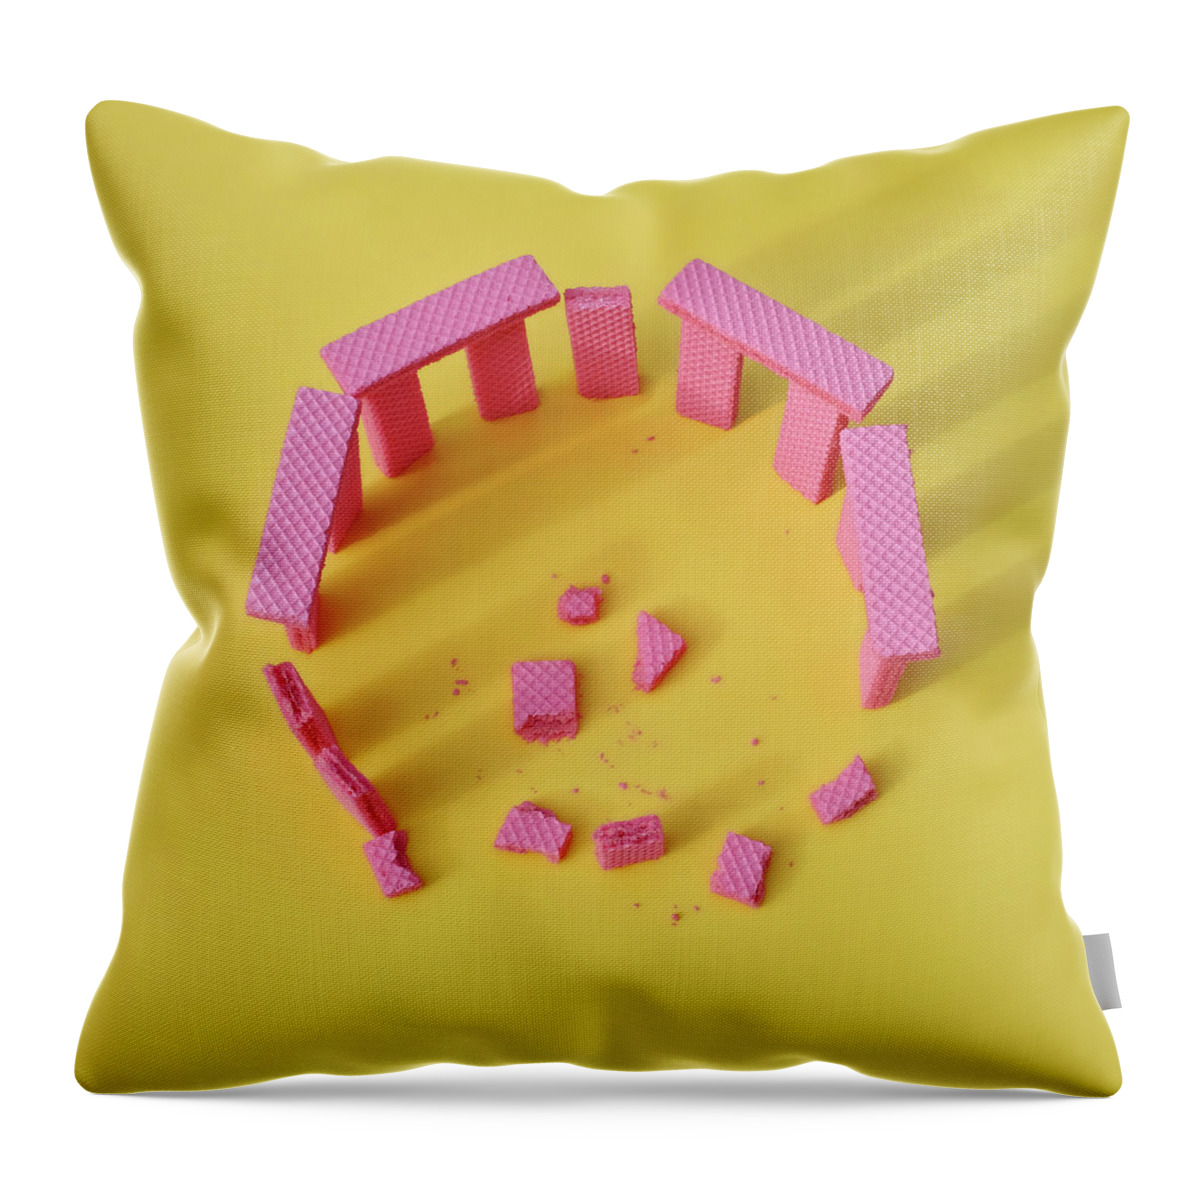 Shadow Throw Pillow featuring the photograph Sun Monument Made From Wafer Cookies by Juj Winn